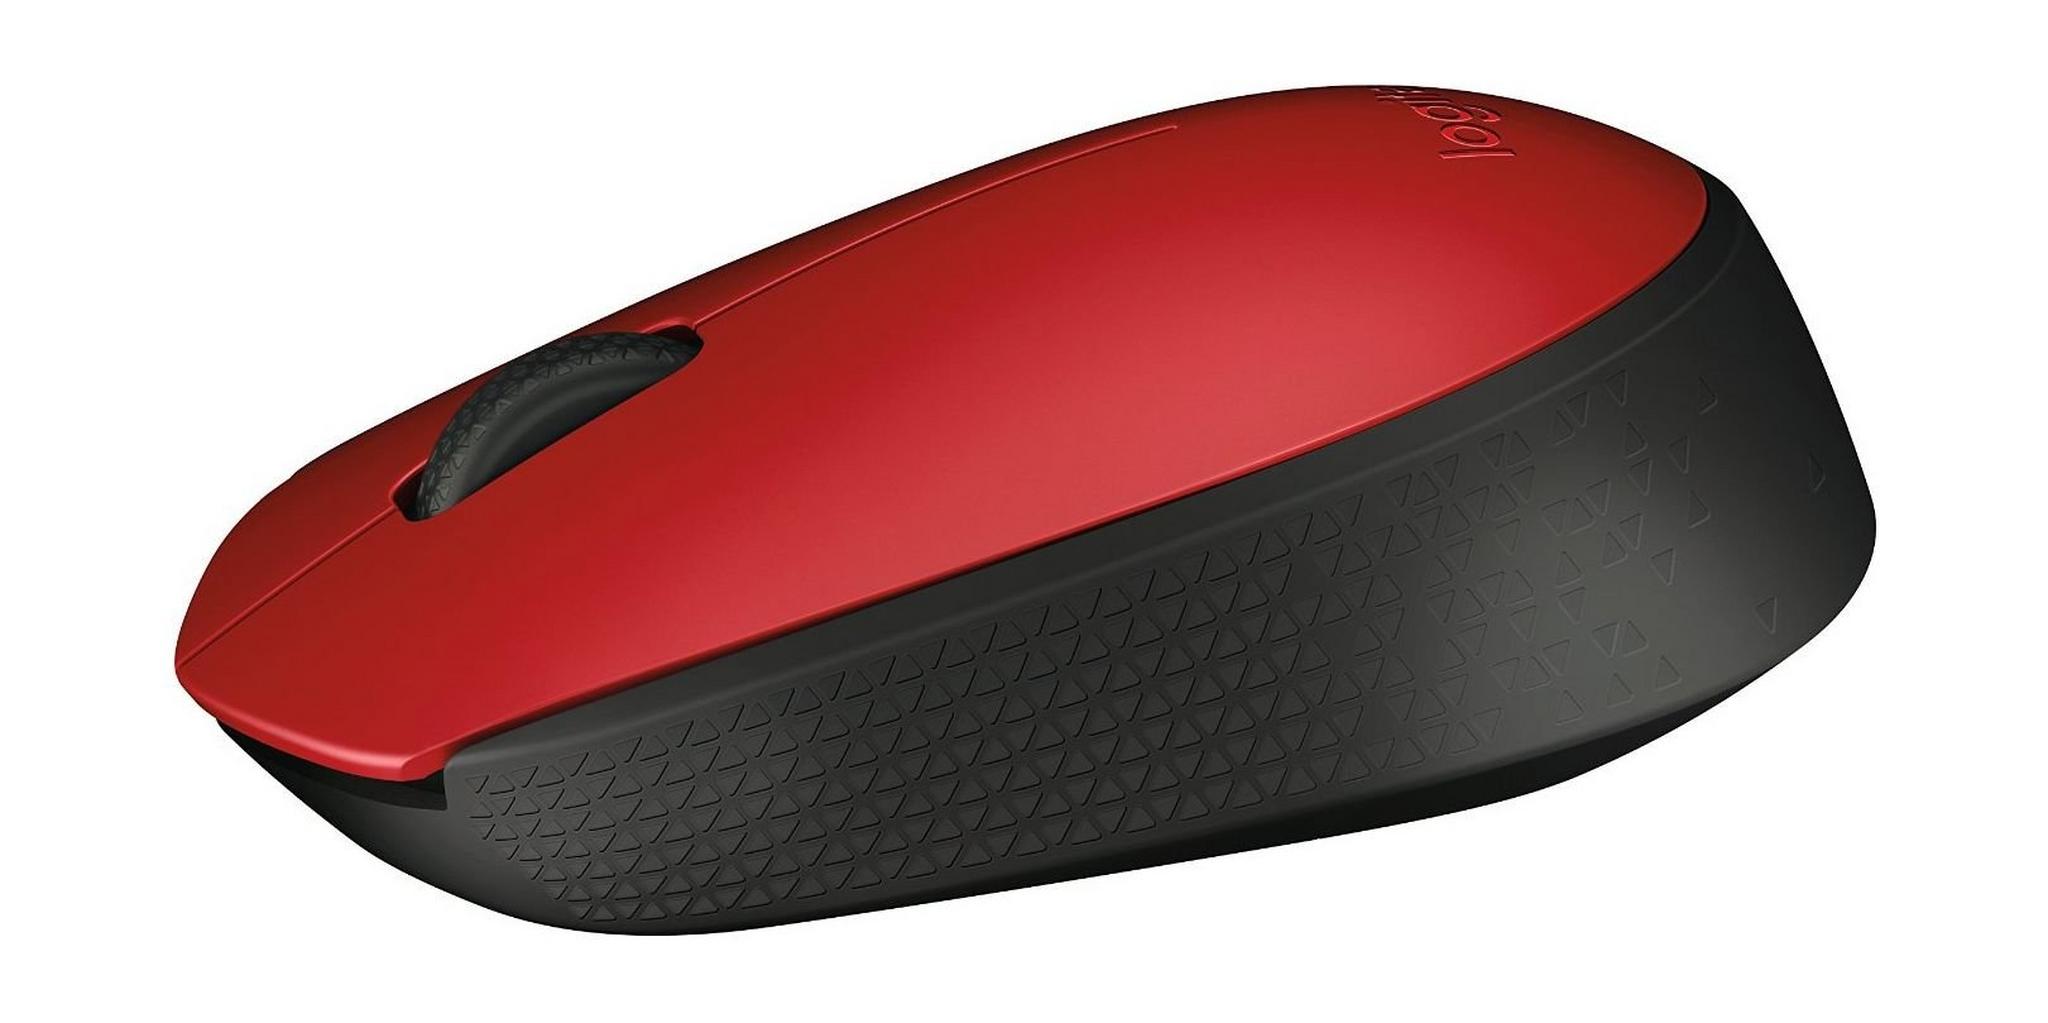 Logitech M171 2.4GHz Wireless Optical Mouse – Red